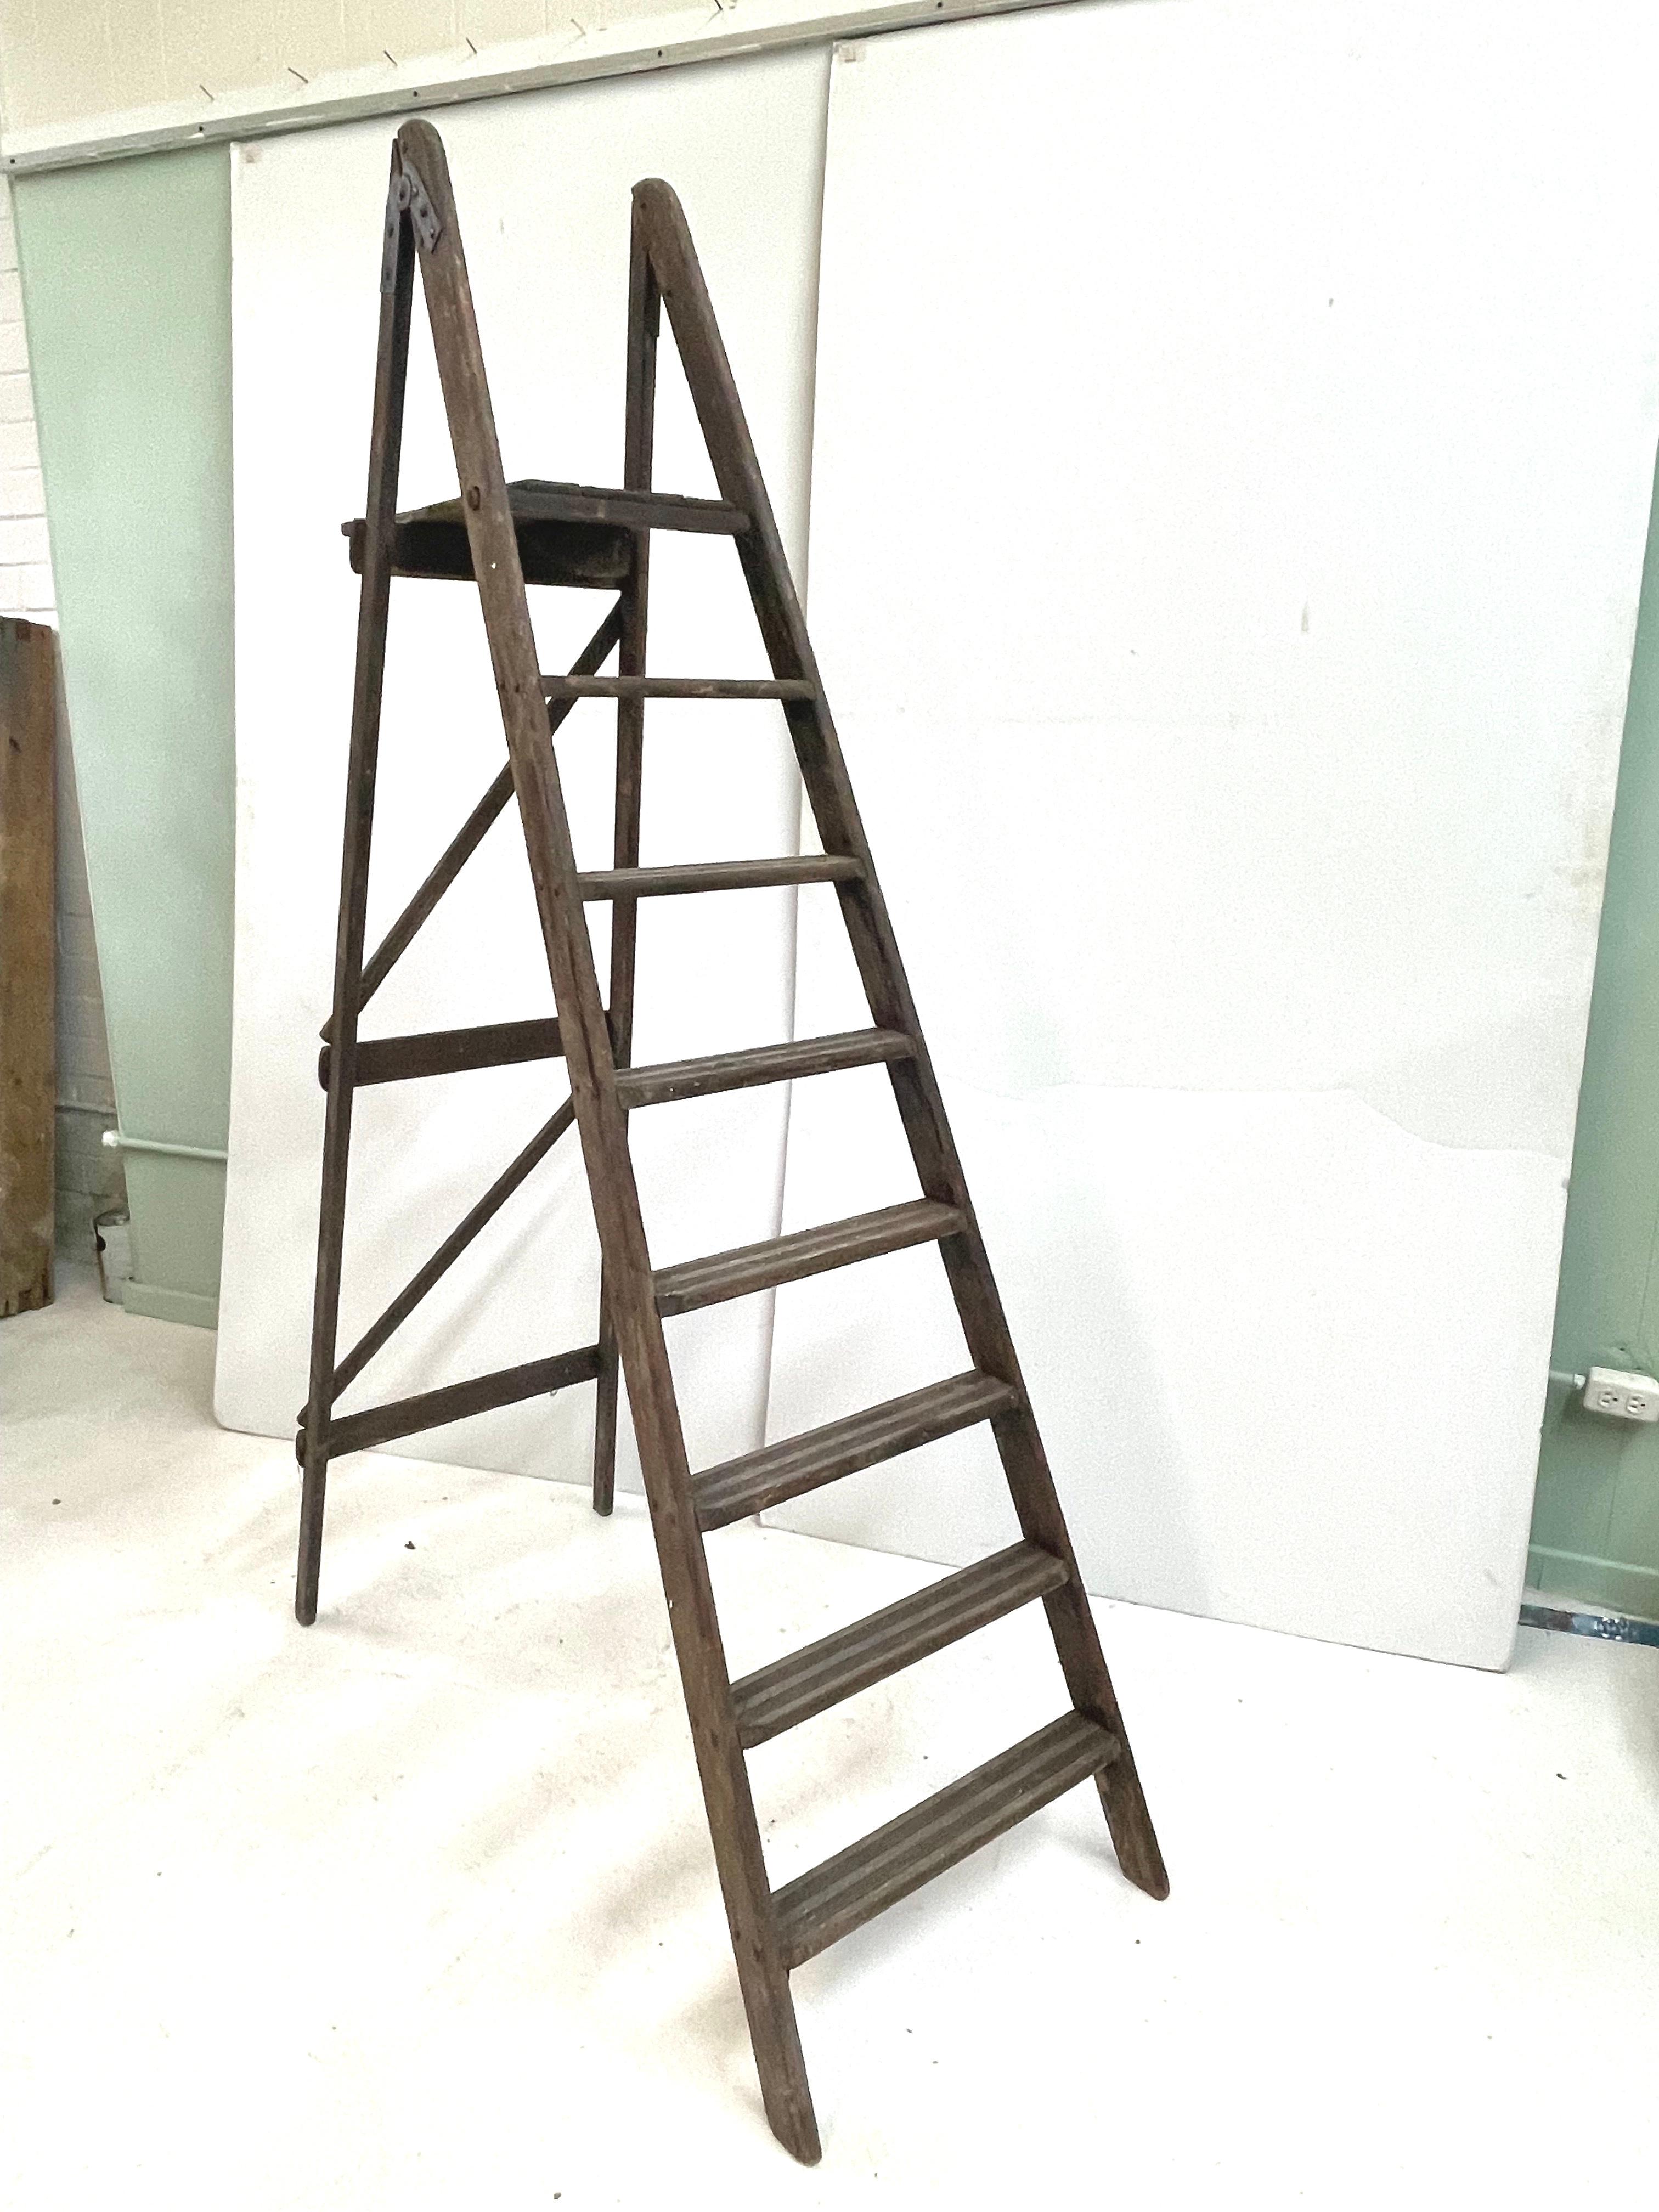 This well-worn and tall late 19th century English seven step folding ladder features a tray shelf at the top and has the original brackets, hardware, and dowels. The weathered patina of the wood has beautifully faded to a warm silver tone. The